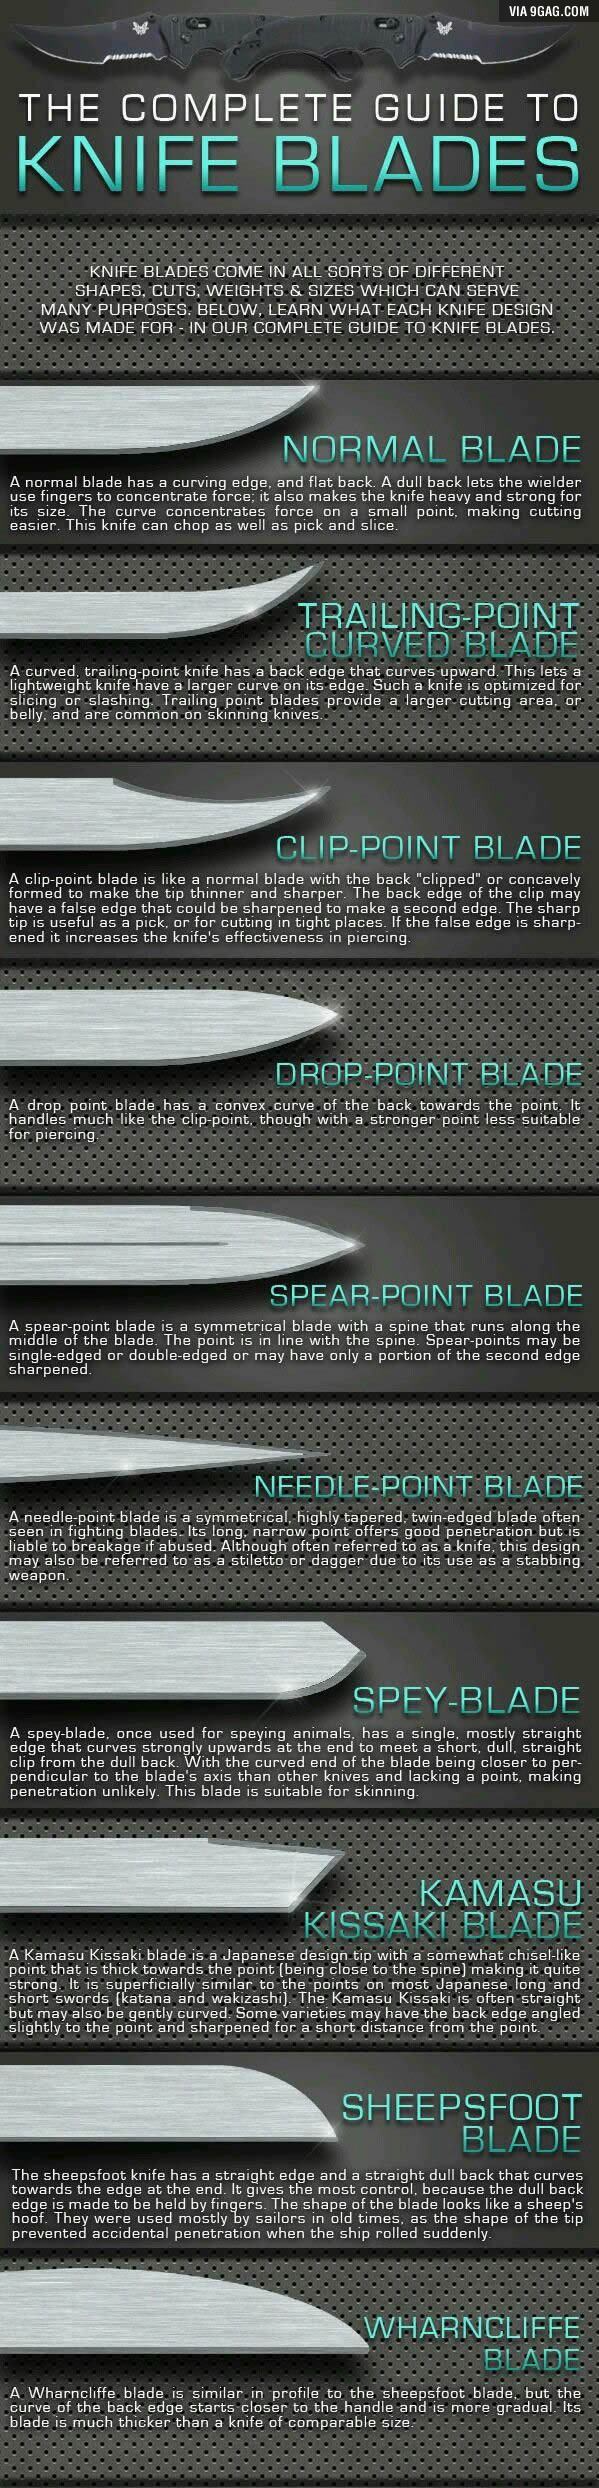 the complete guide to knife blades